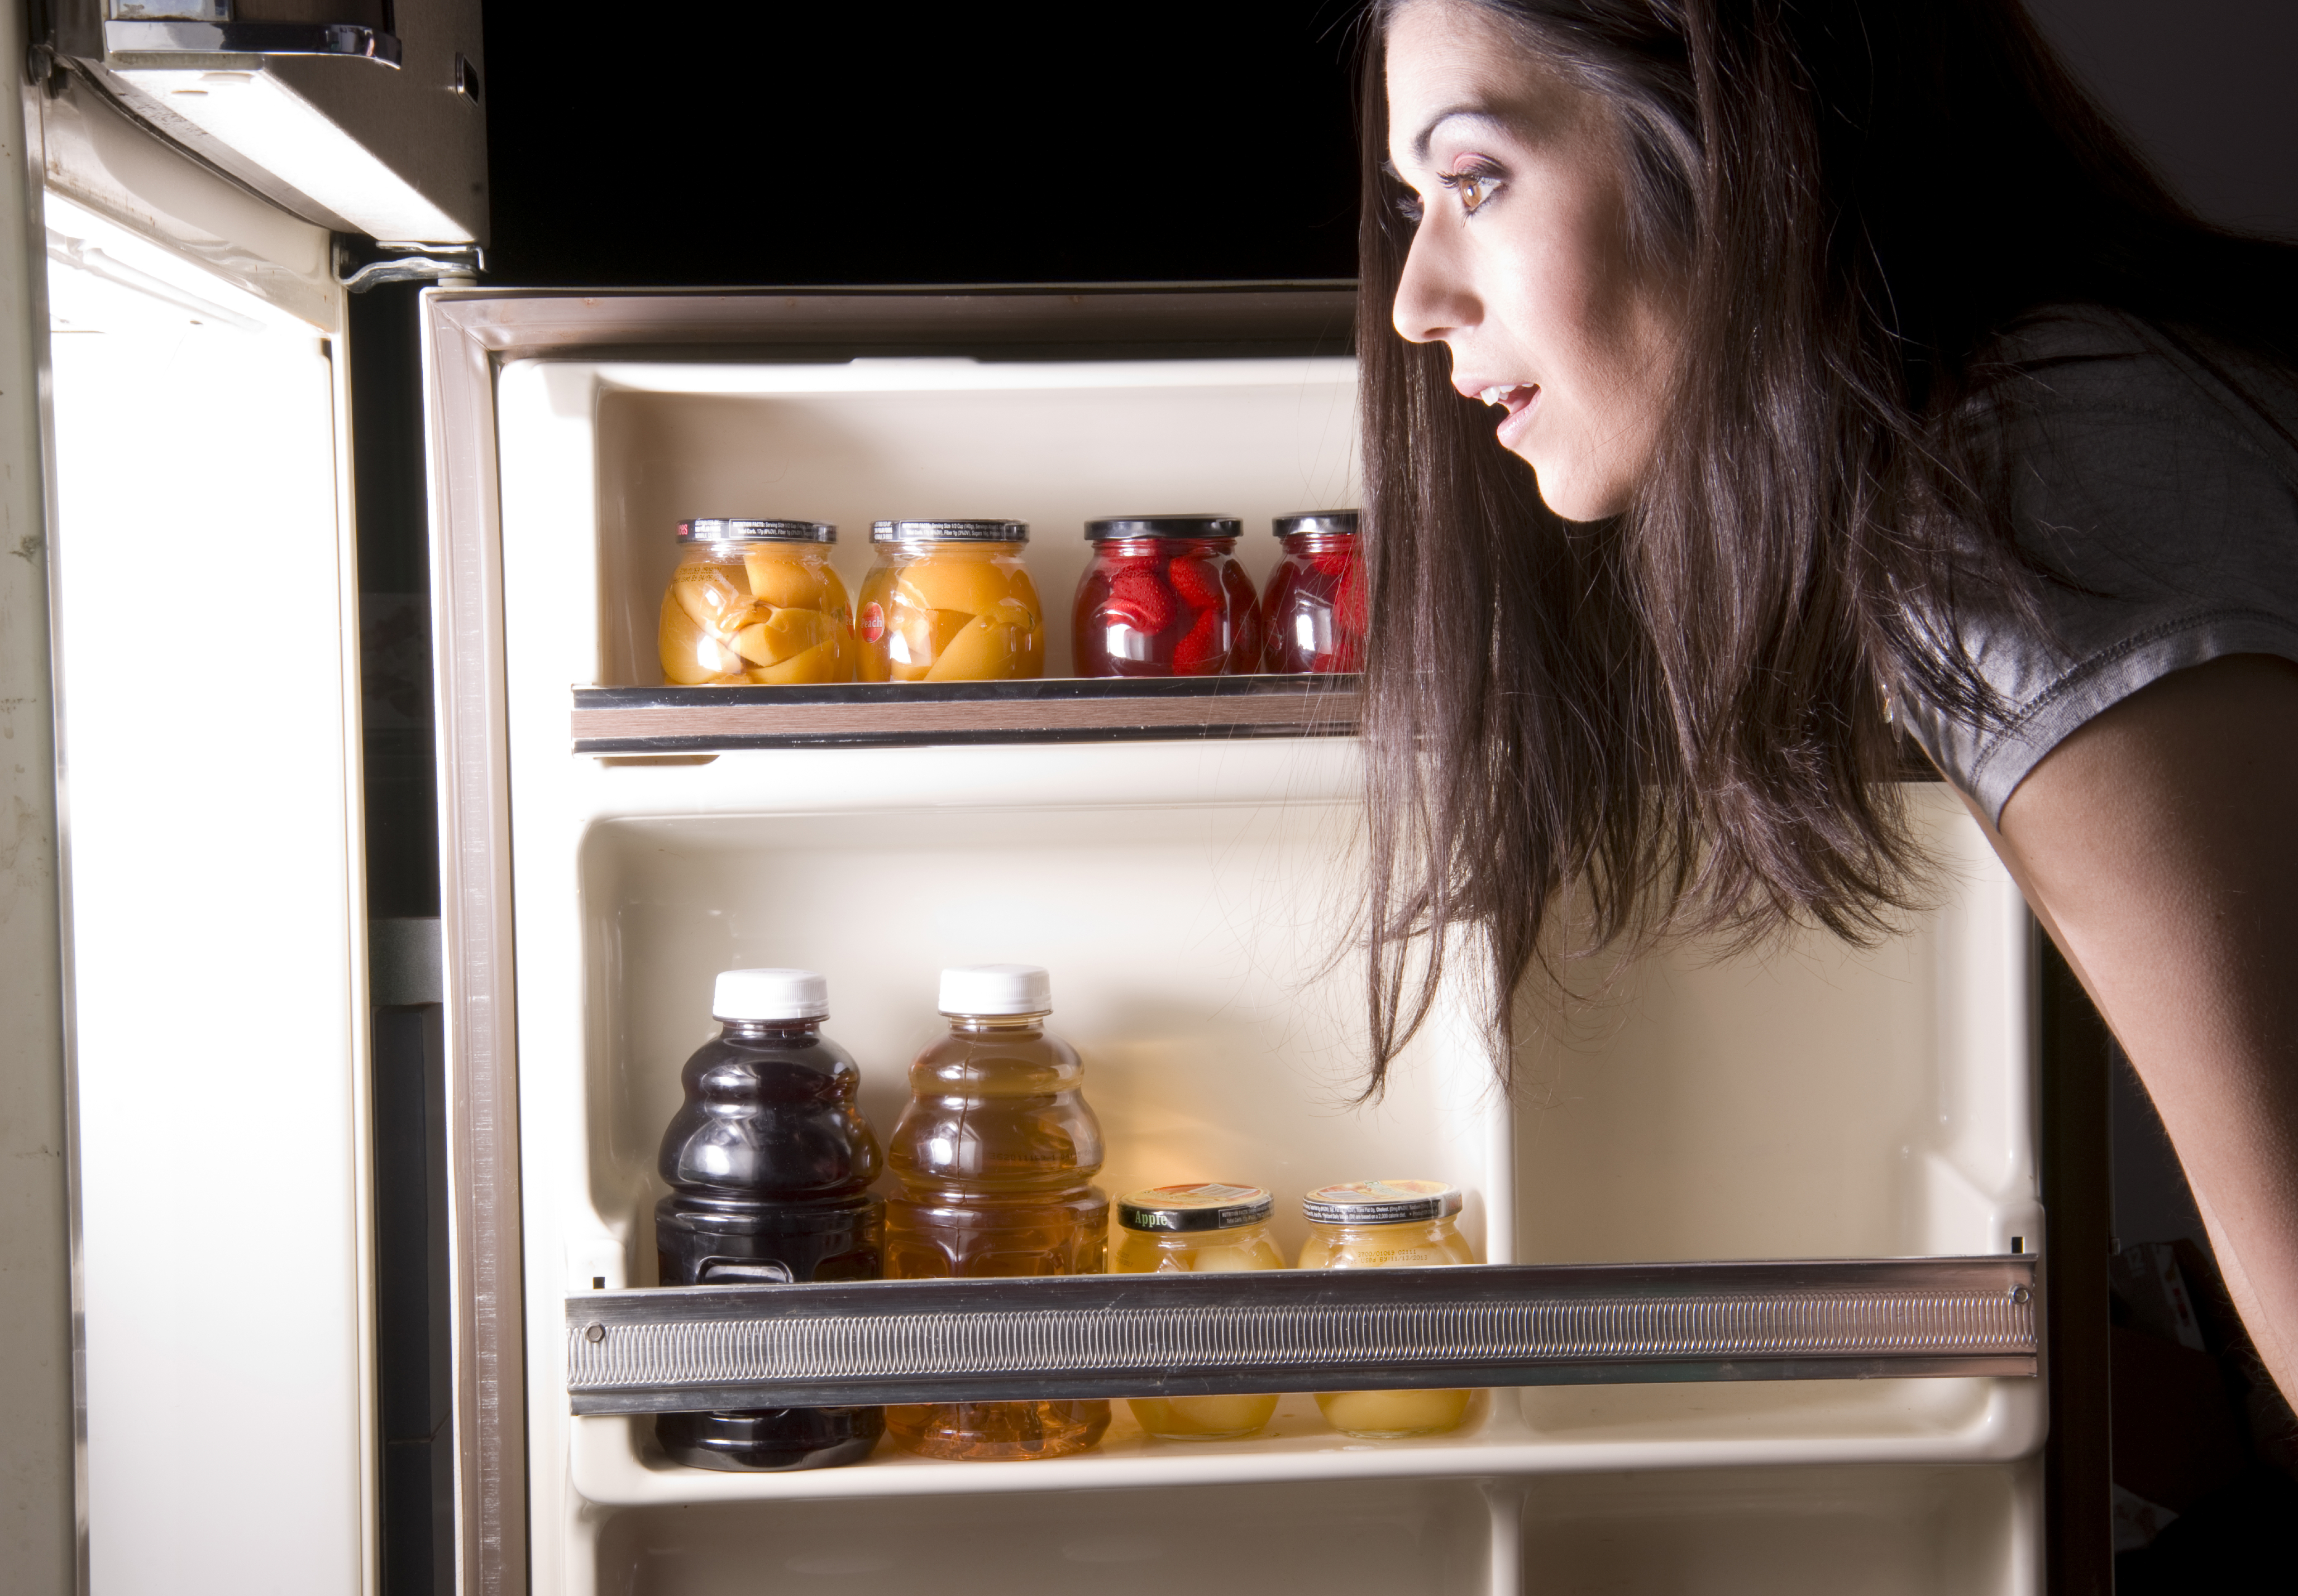 Your No-Guilt Guide to Satisfying Late-Night Cravings